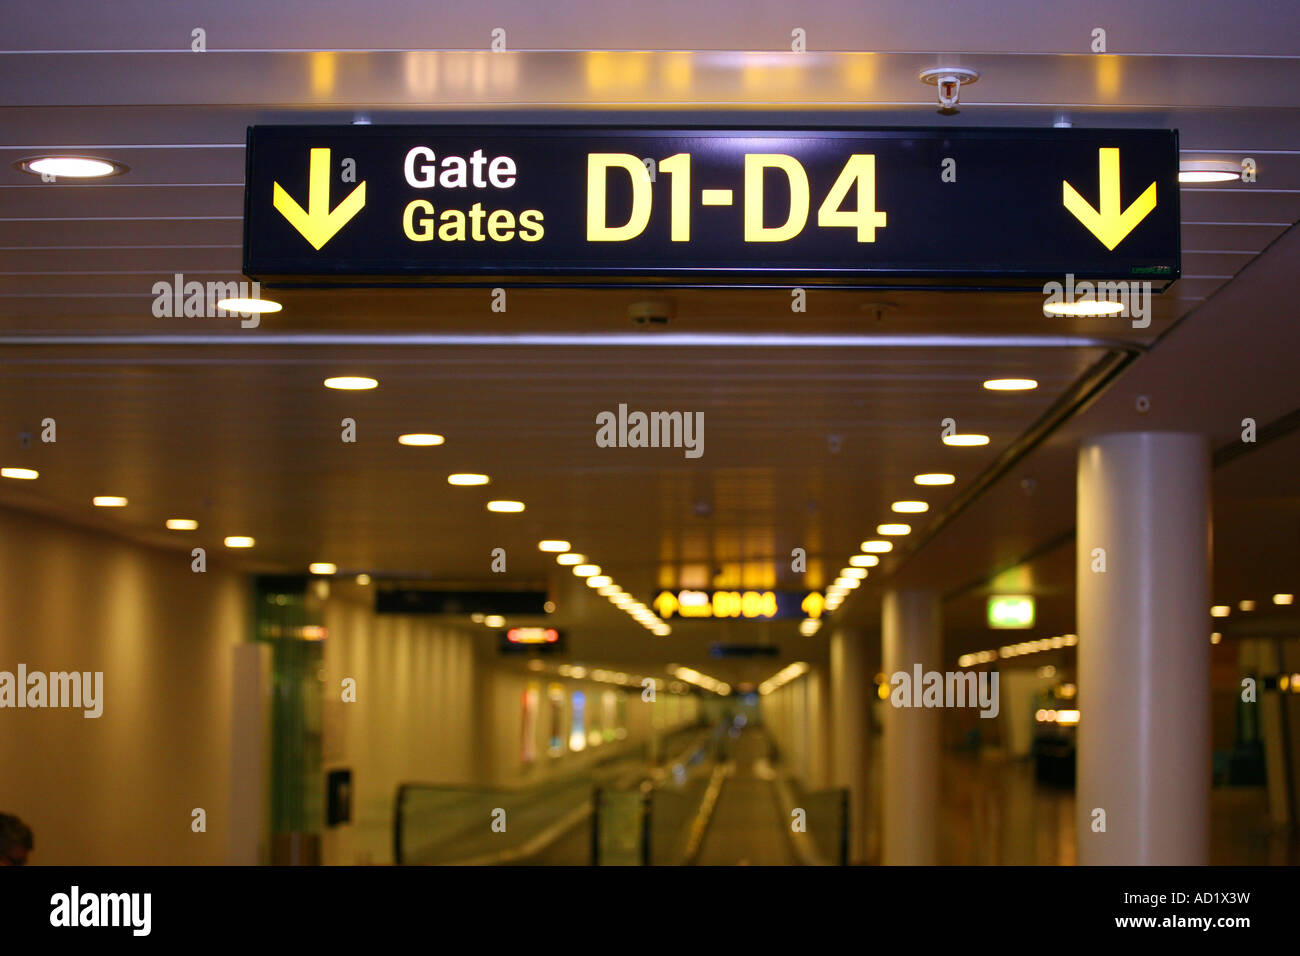 airport gate sign Stock Photo